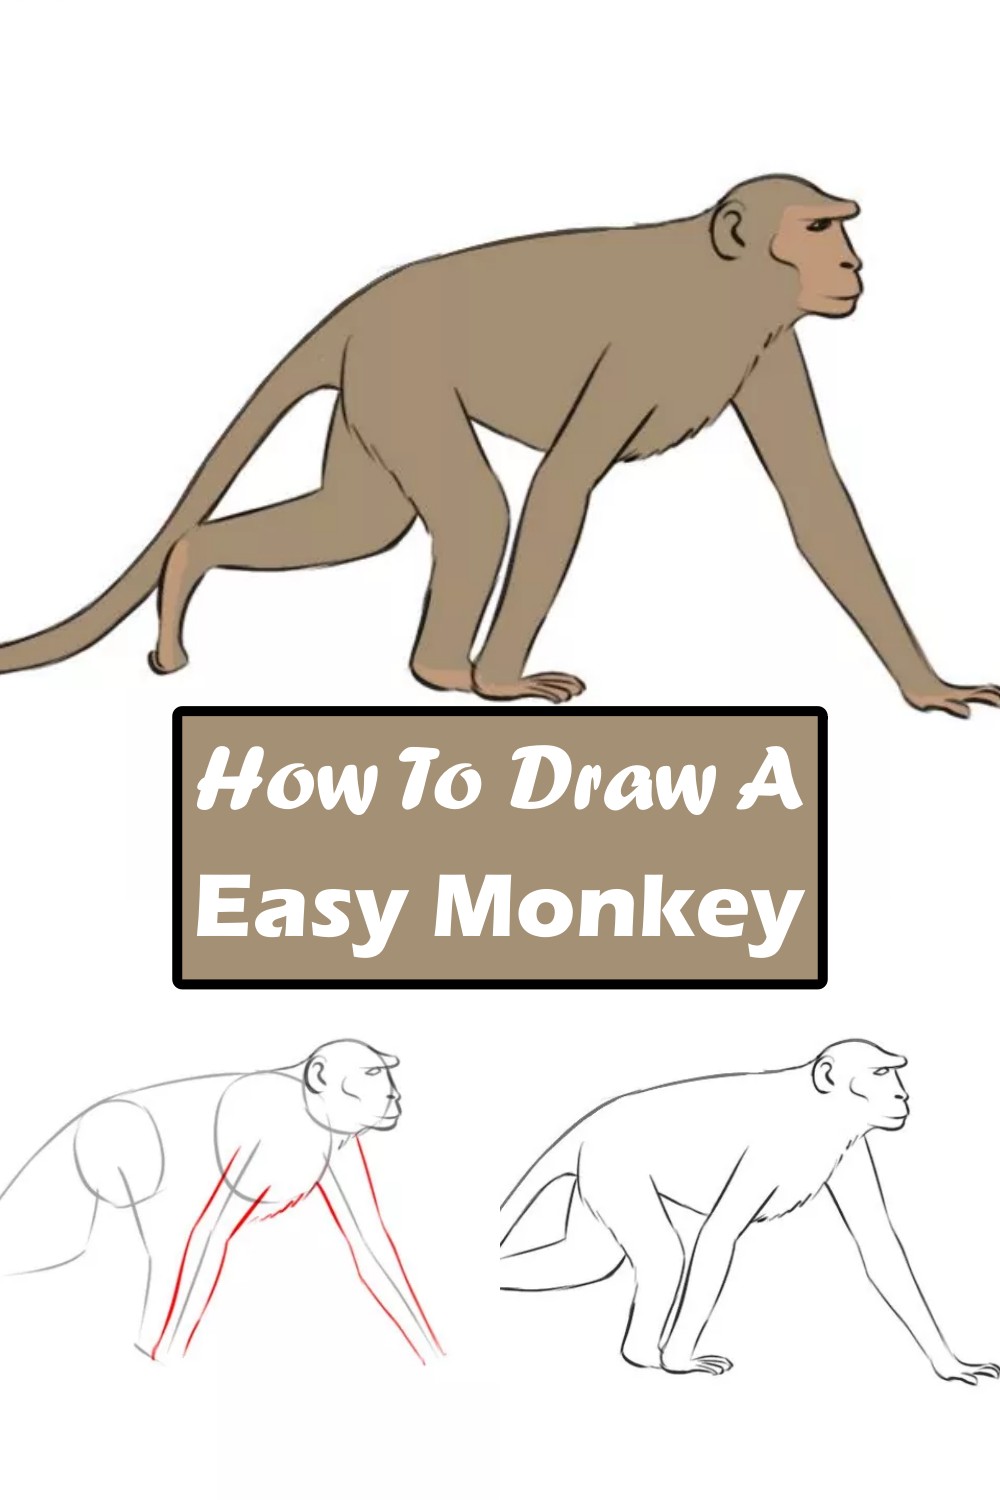 How To Draw A Easy Monkey